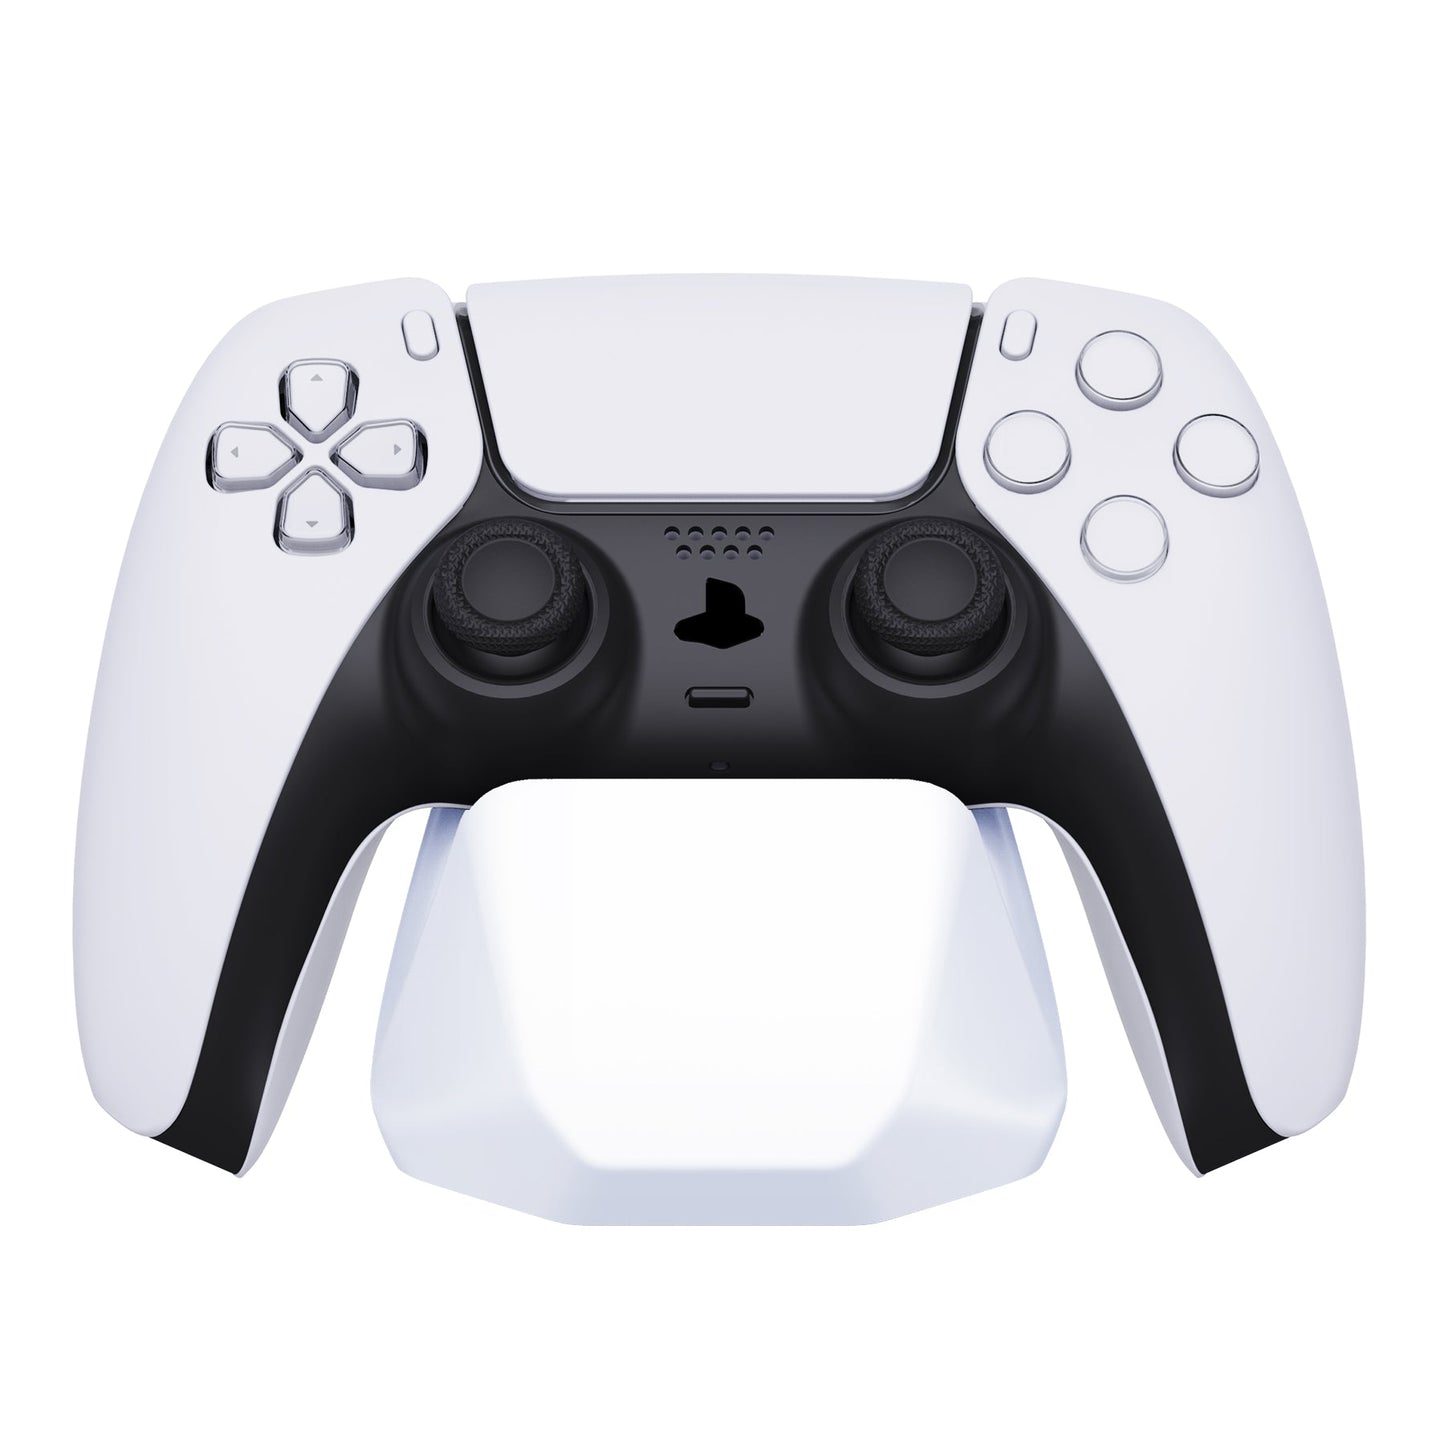 PlayVital White Universal Game Controller Stand for Xbox Series X/S Controller, Gamepad Stand for PS5/4 Controller, Display Stand Holder for Xbox Controller - PFPJ056 PlayVital